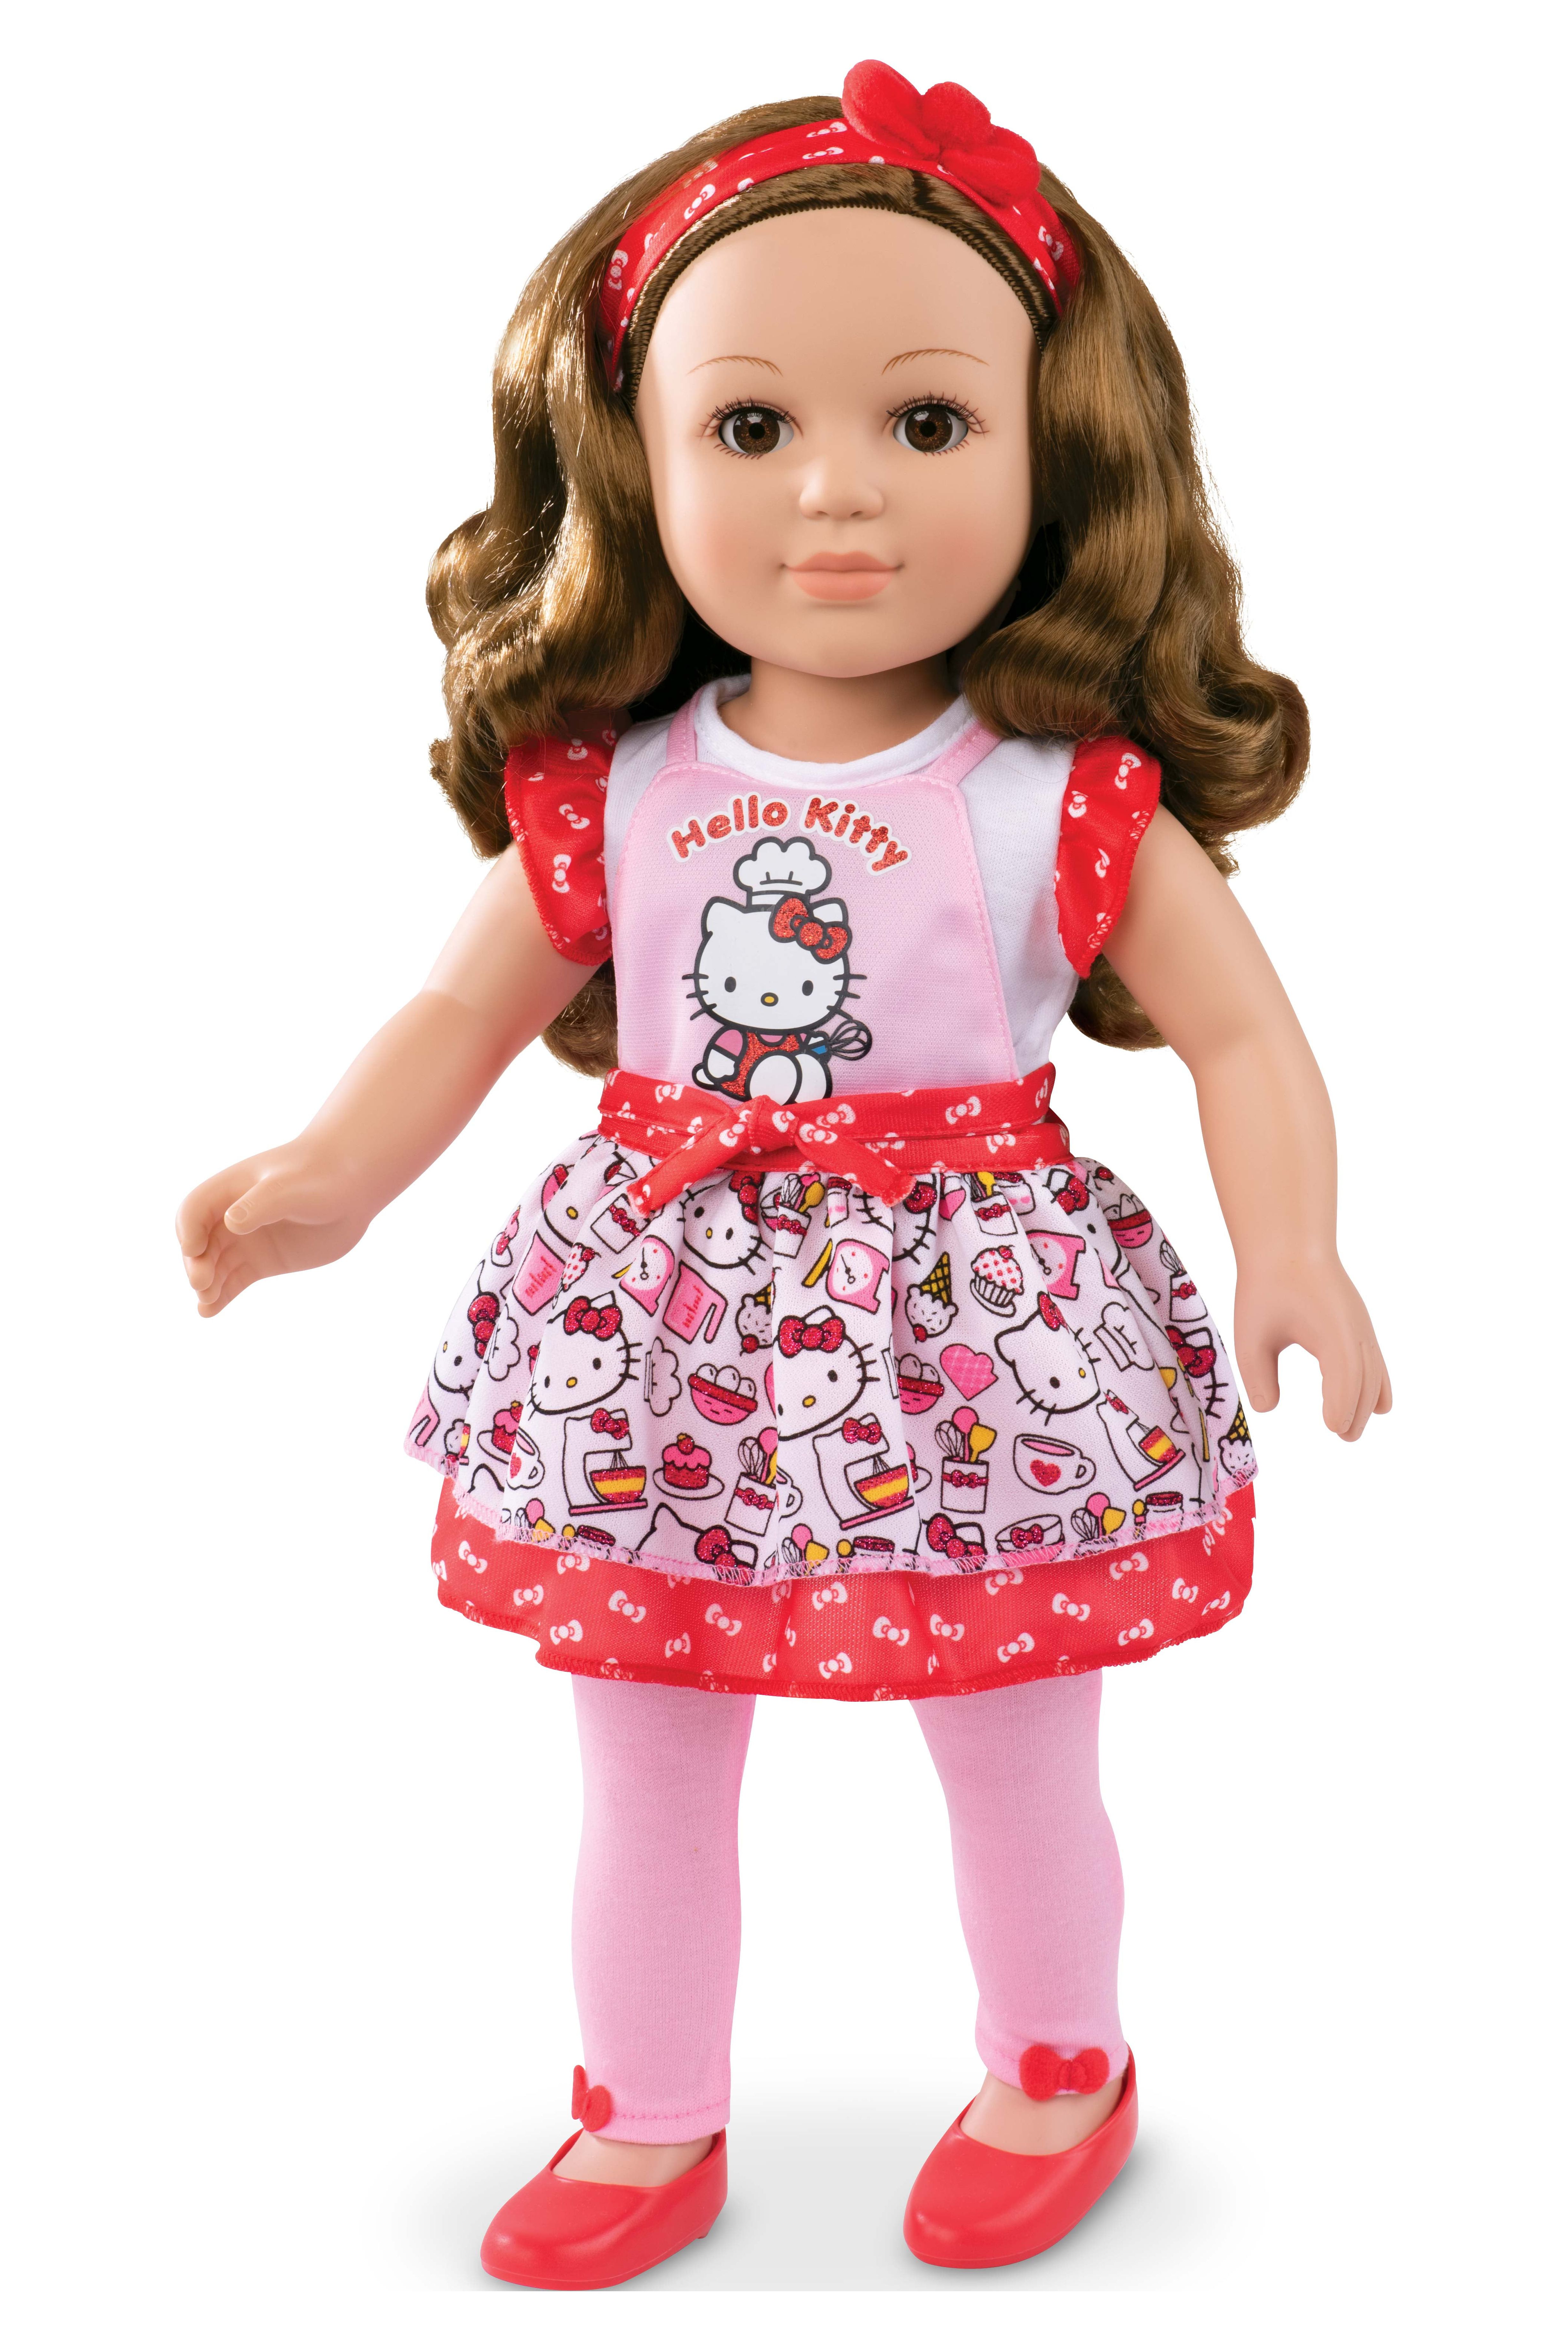 My Life As Poseable Hello Kitty Baker 18inch Doll, Brunette Hair, Brown Eyes - image 5 of 8